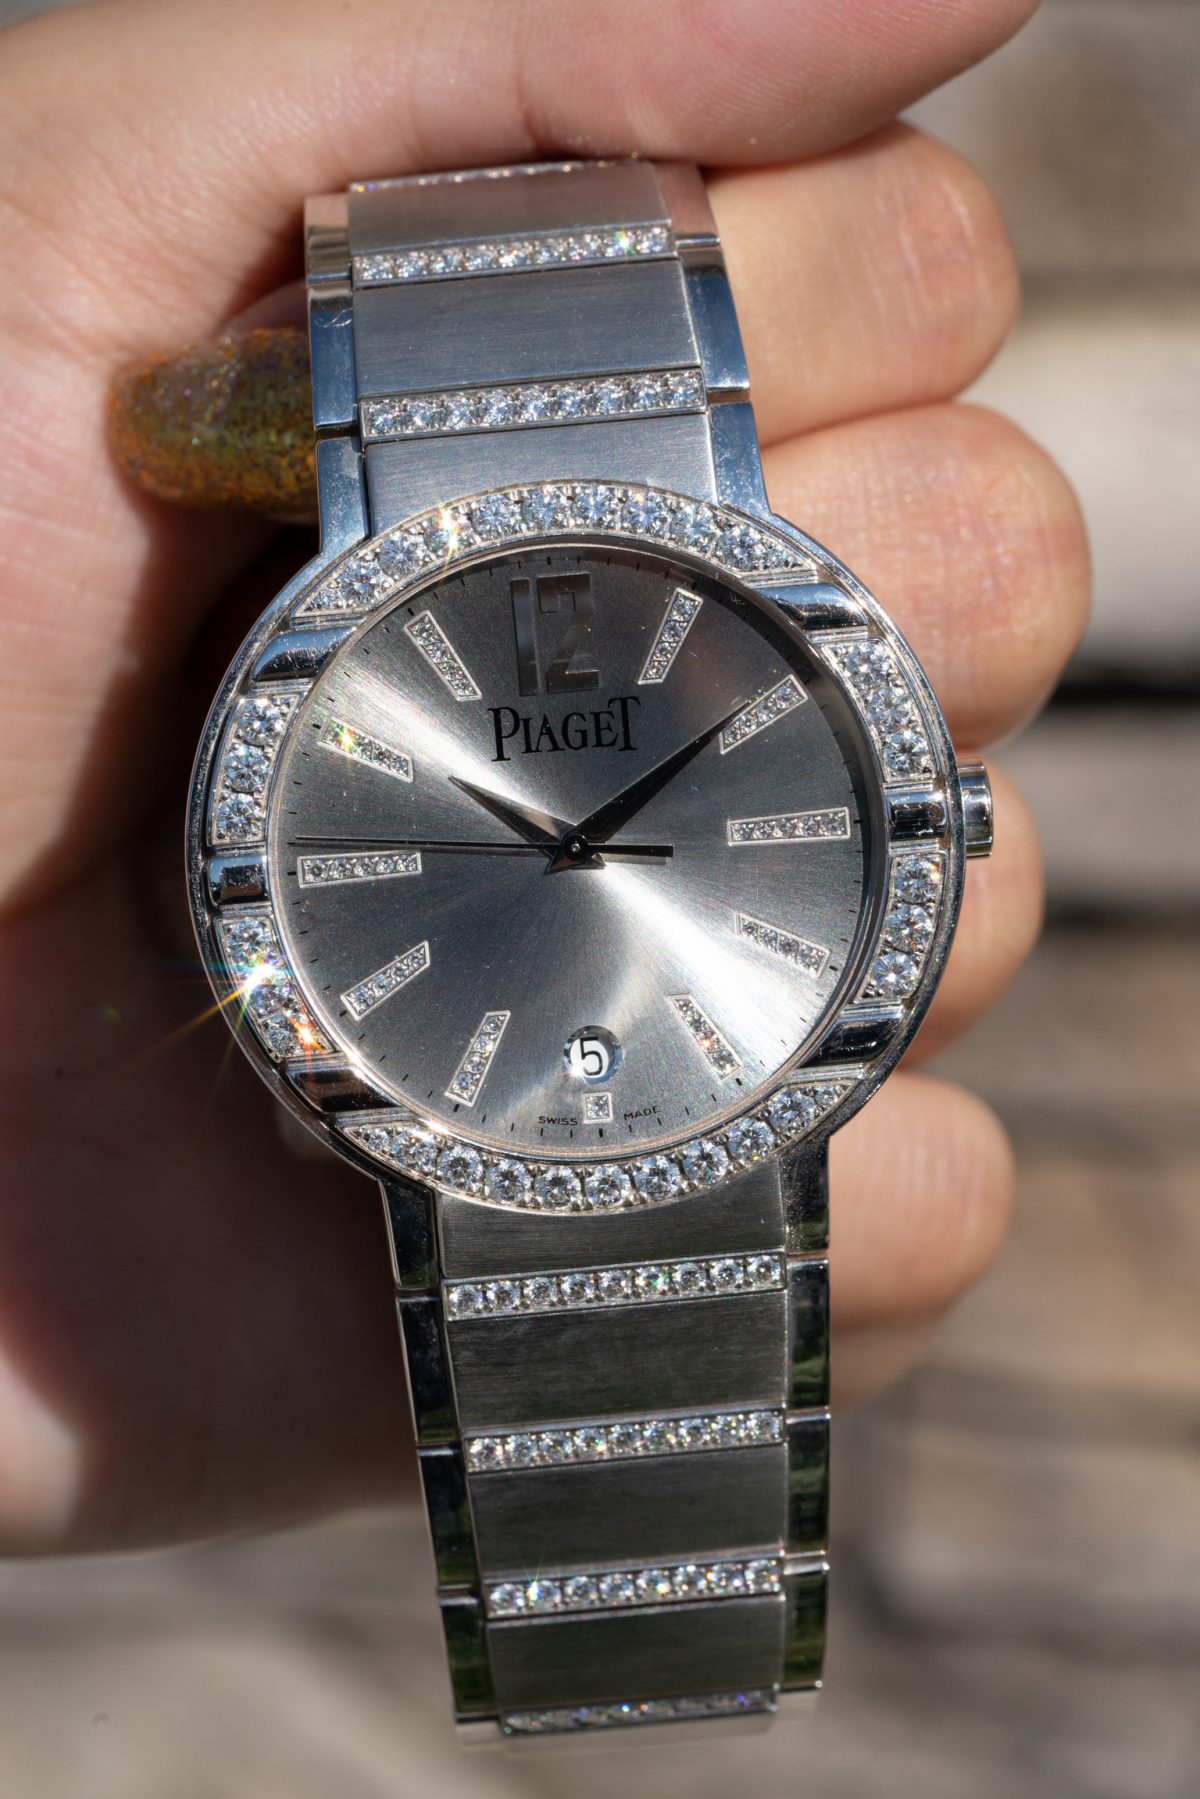 the game-changing Piaget Polo S